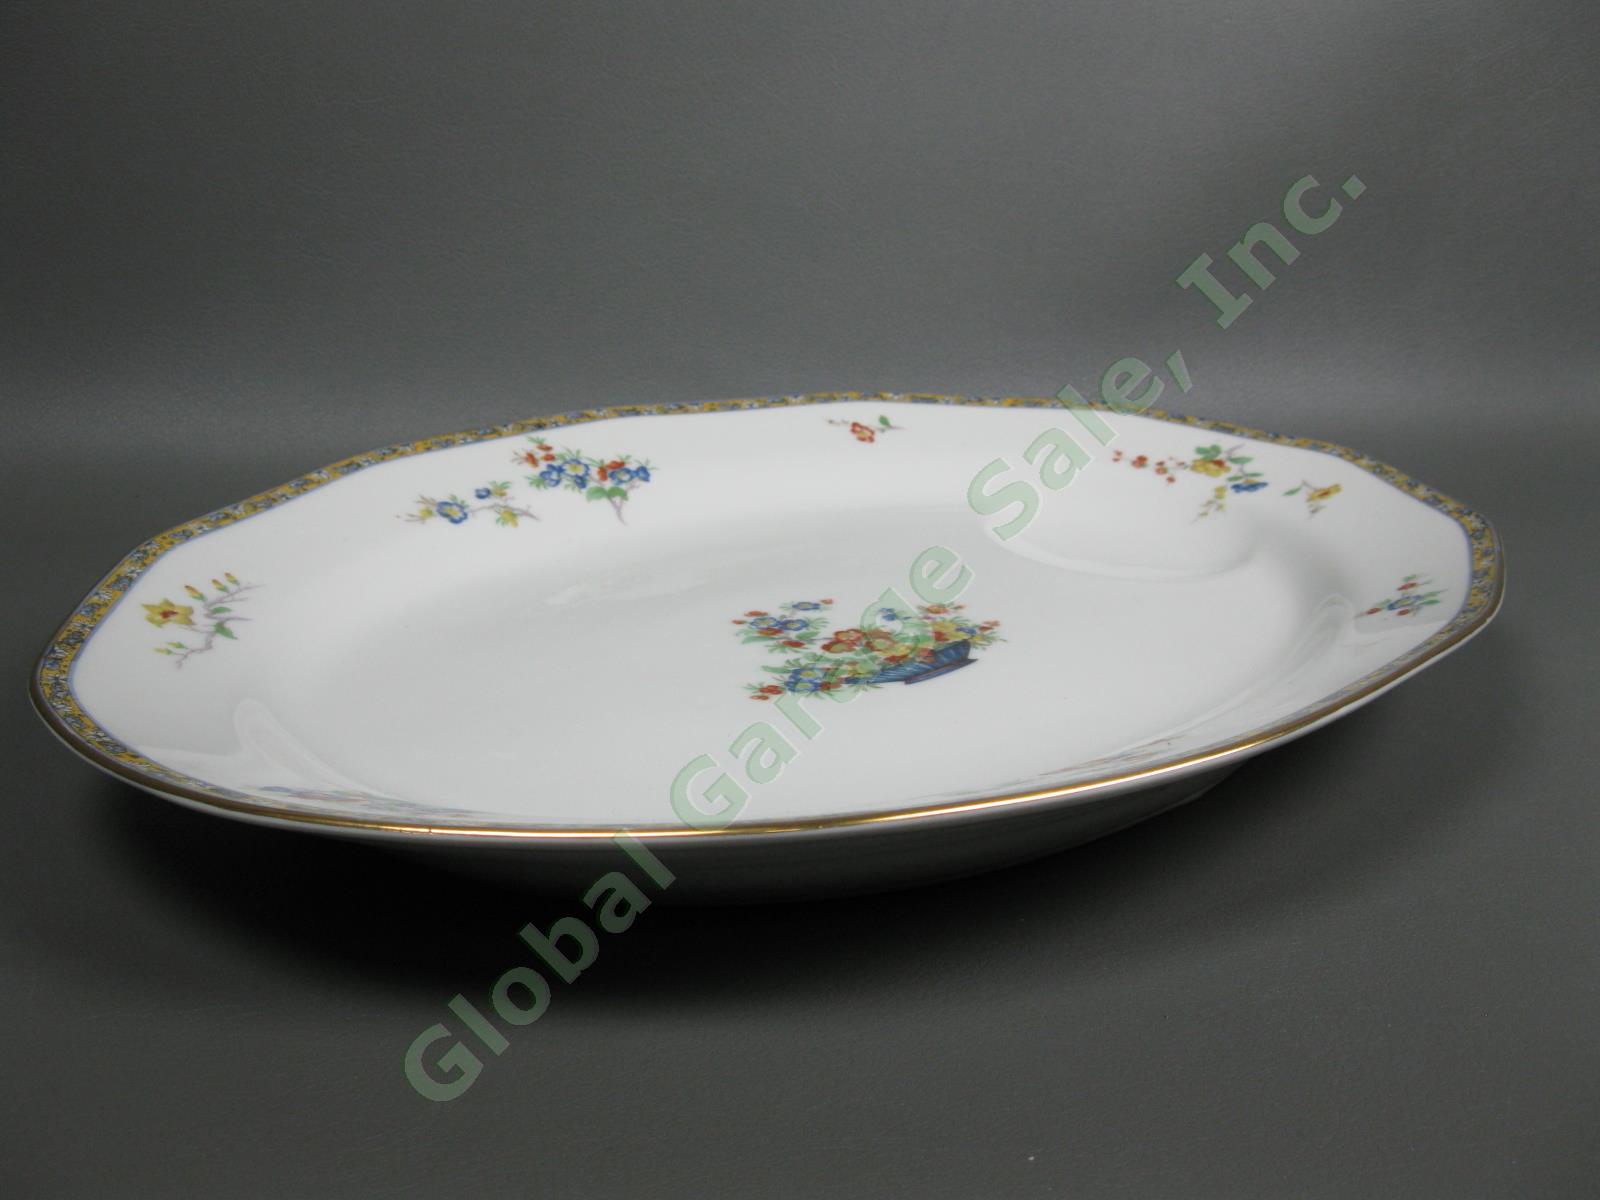 Theodore Haviland Montreux Mongolia 15" Large Oval Serving Platter Tray Limoges 6